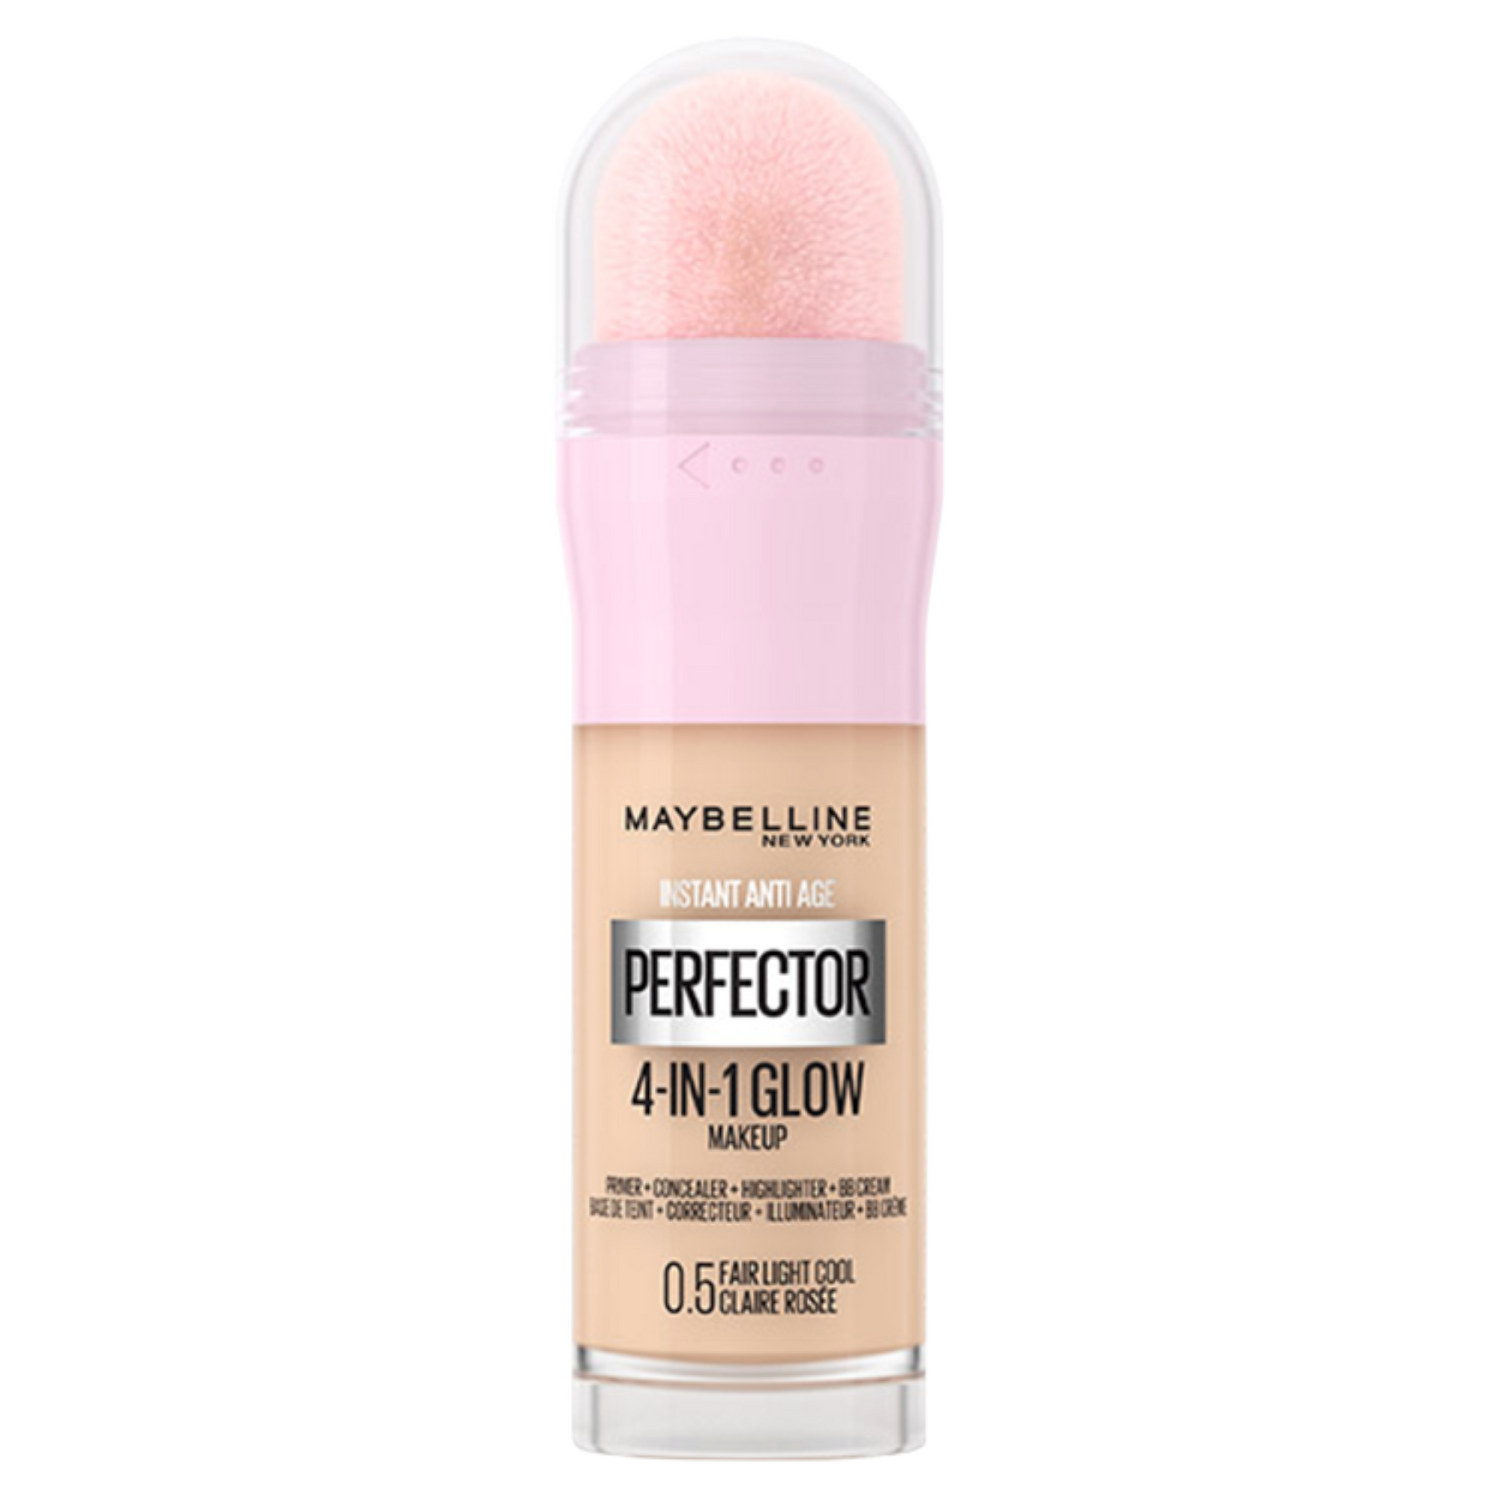 MAYBELLINE INSTANT AGE REWIND PERFECTOR 4-IN-1 GLOW MAKEUP 0.5 LIGHT COOL 20ML